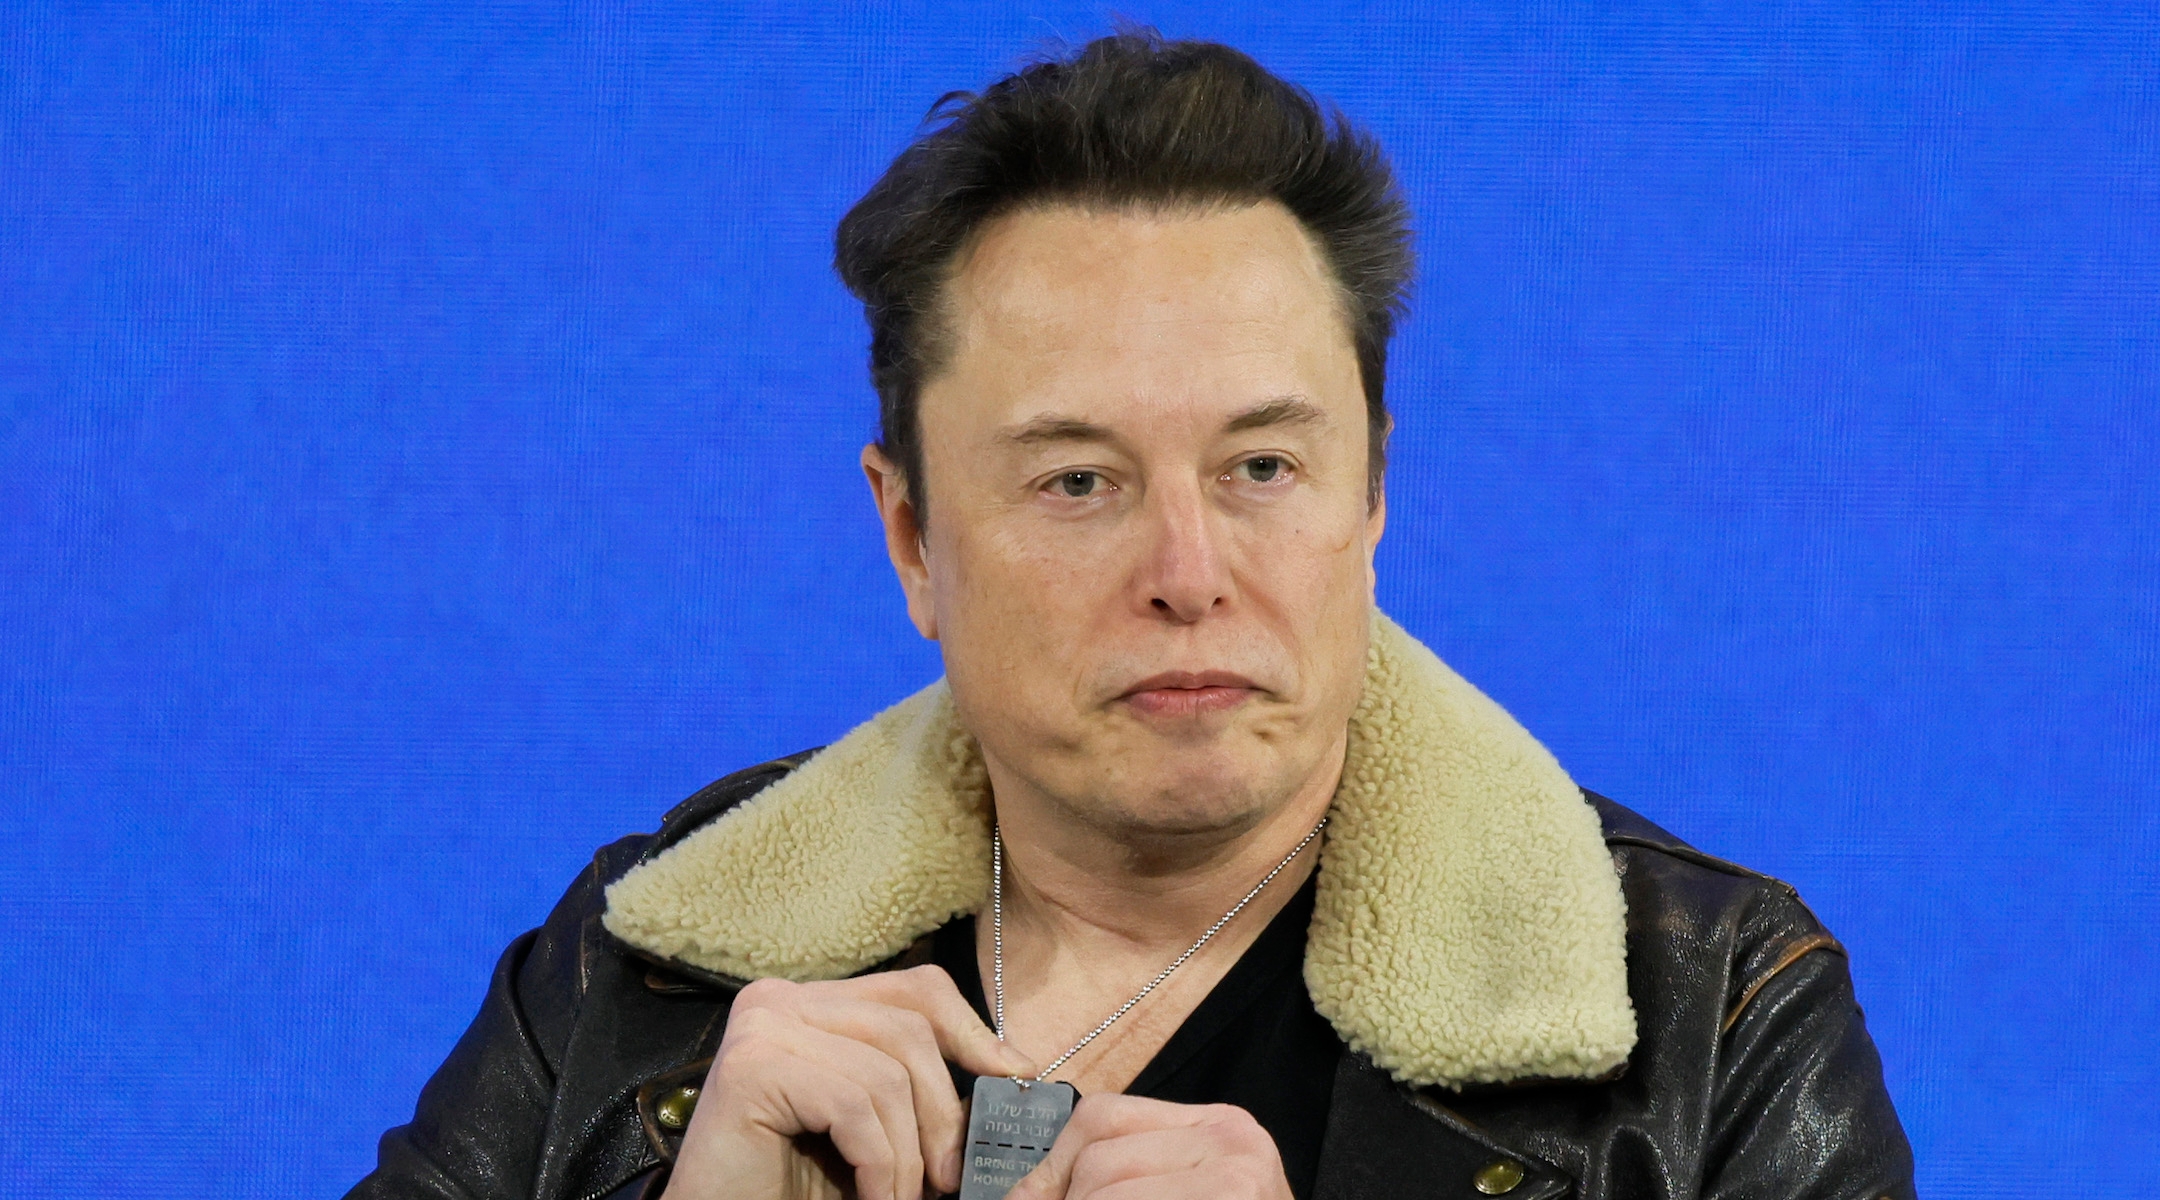 Elon Musk holding up a dog tag supporting the release of Israeli hostages onstage at a conference